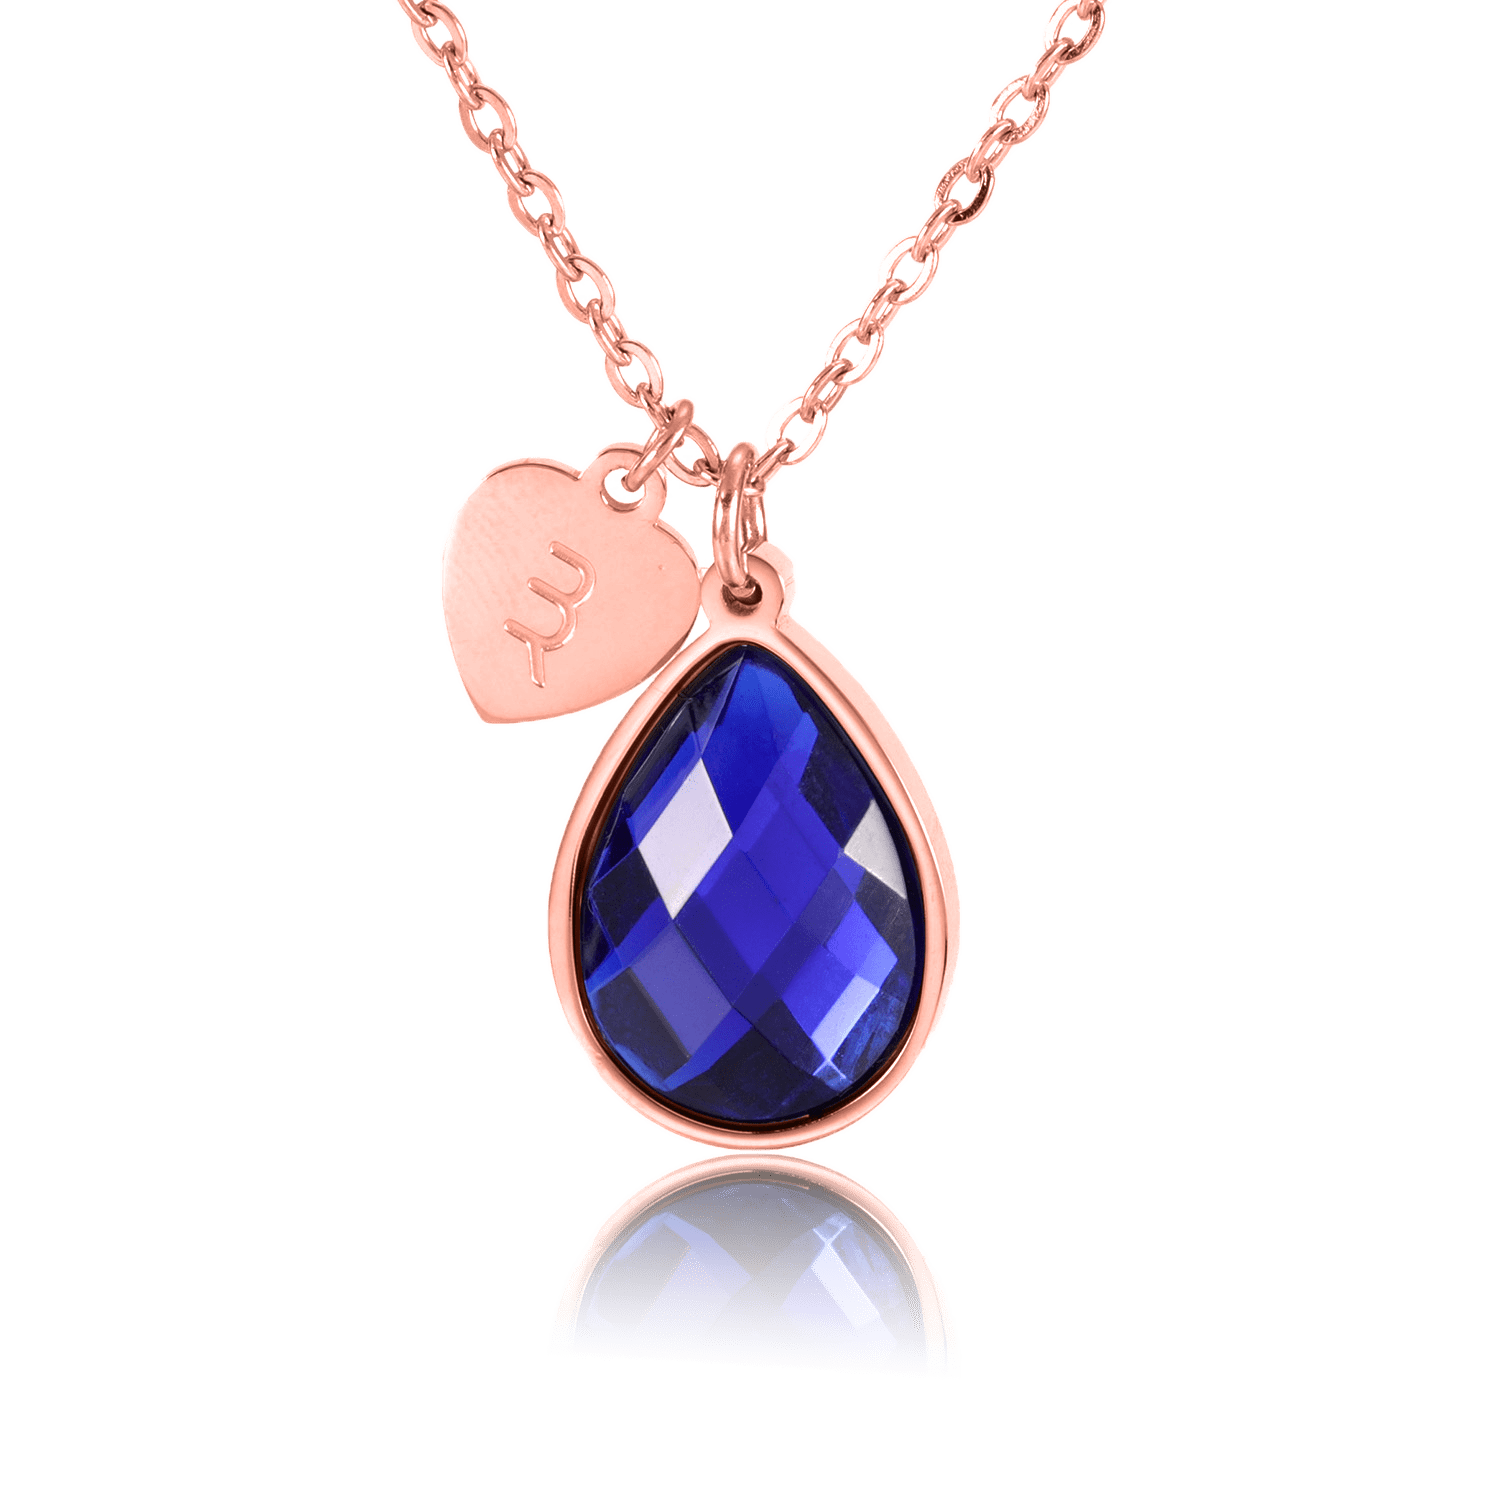 bianco rosso Necklaces Rose Gold December Birthstone - Tanzanite cyprus greece jewelry gift free shipping europe worldwide